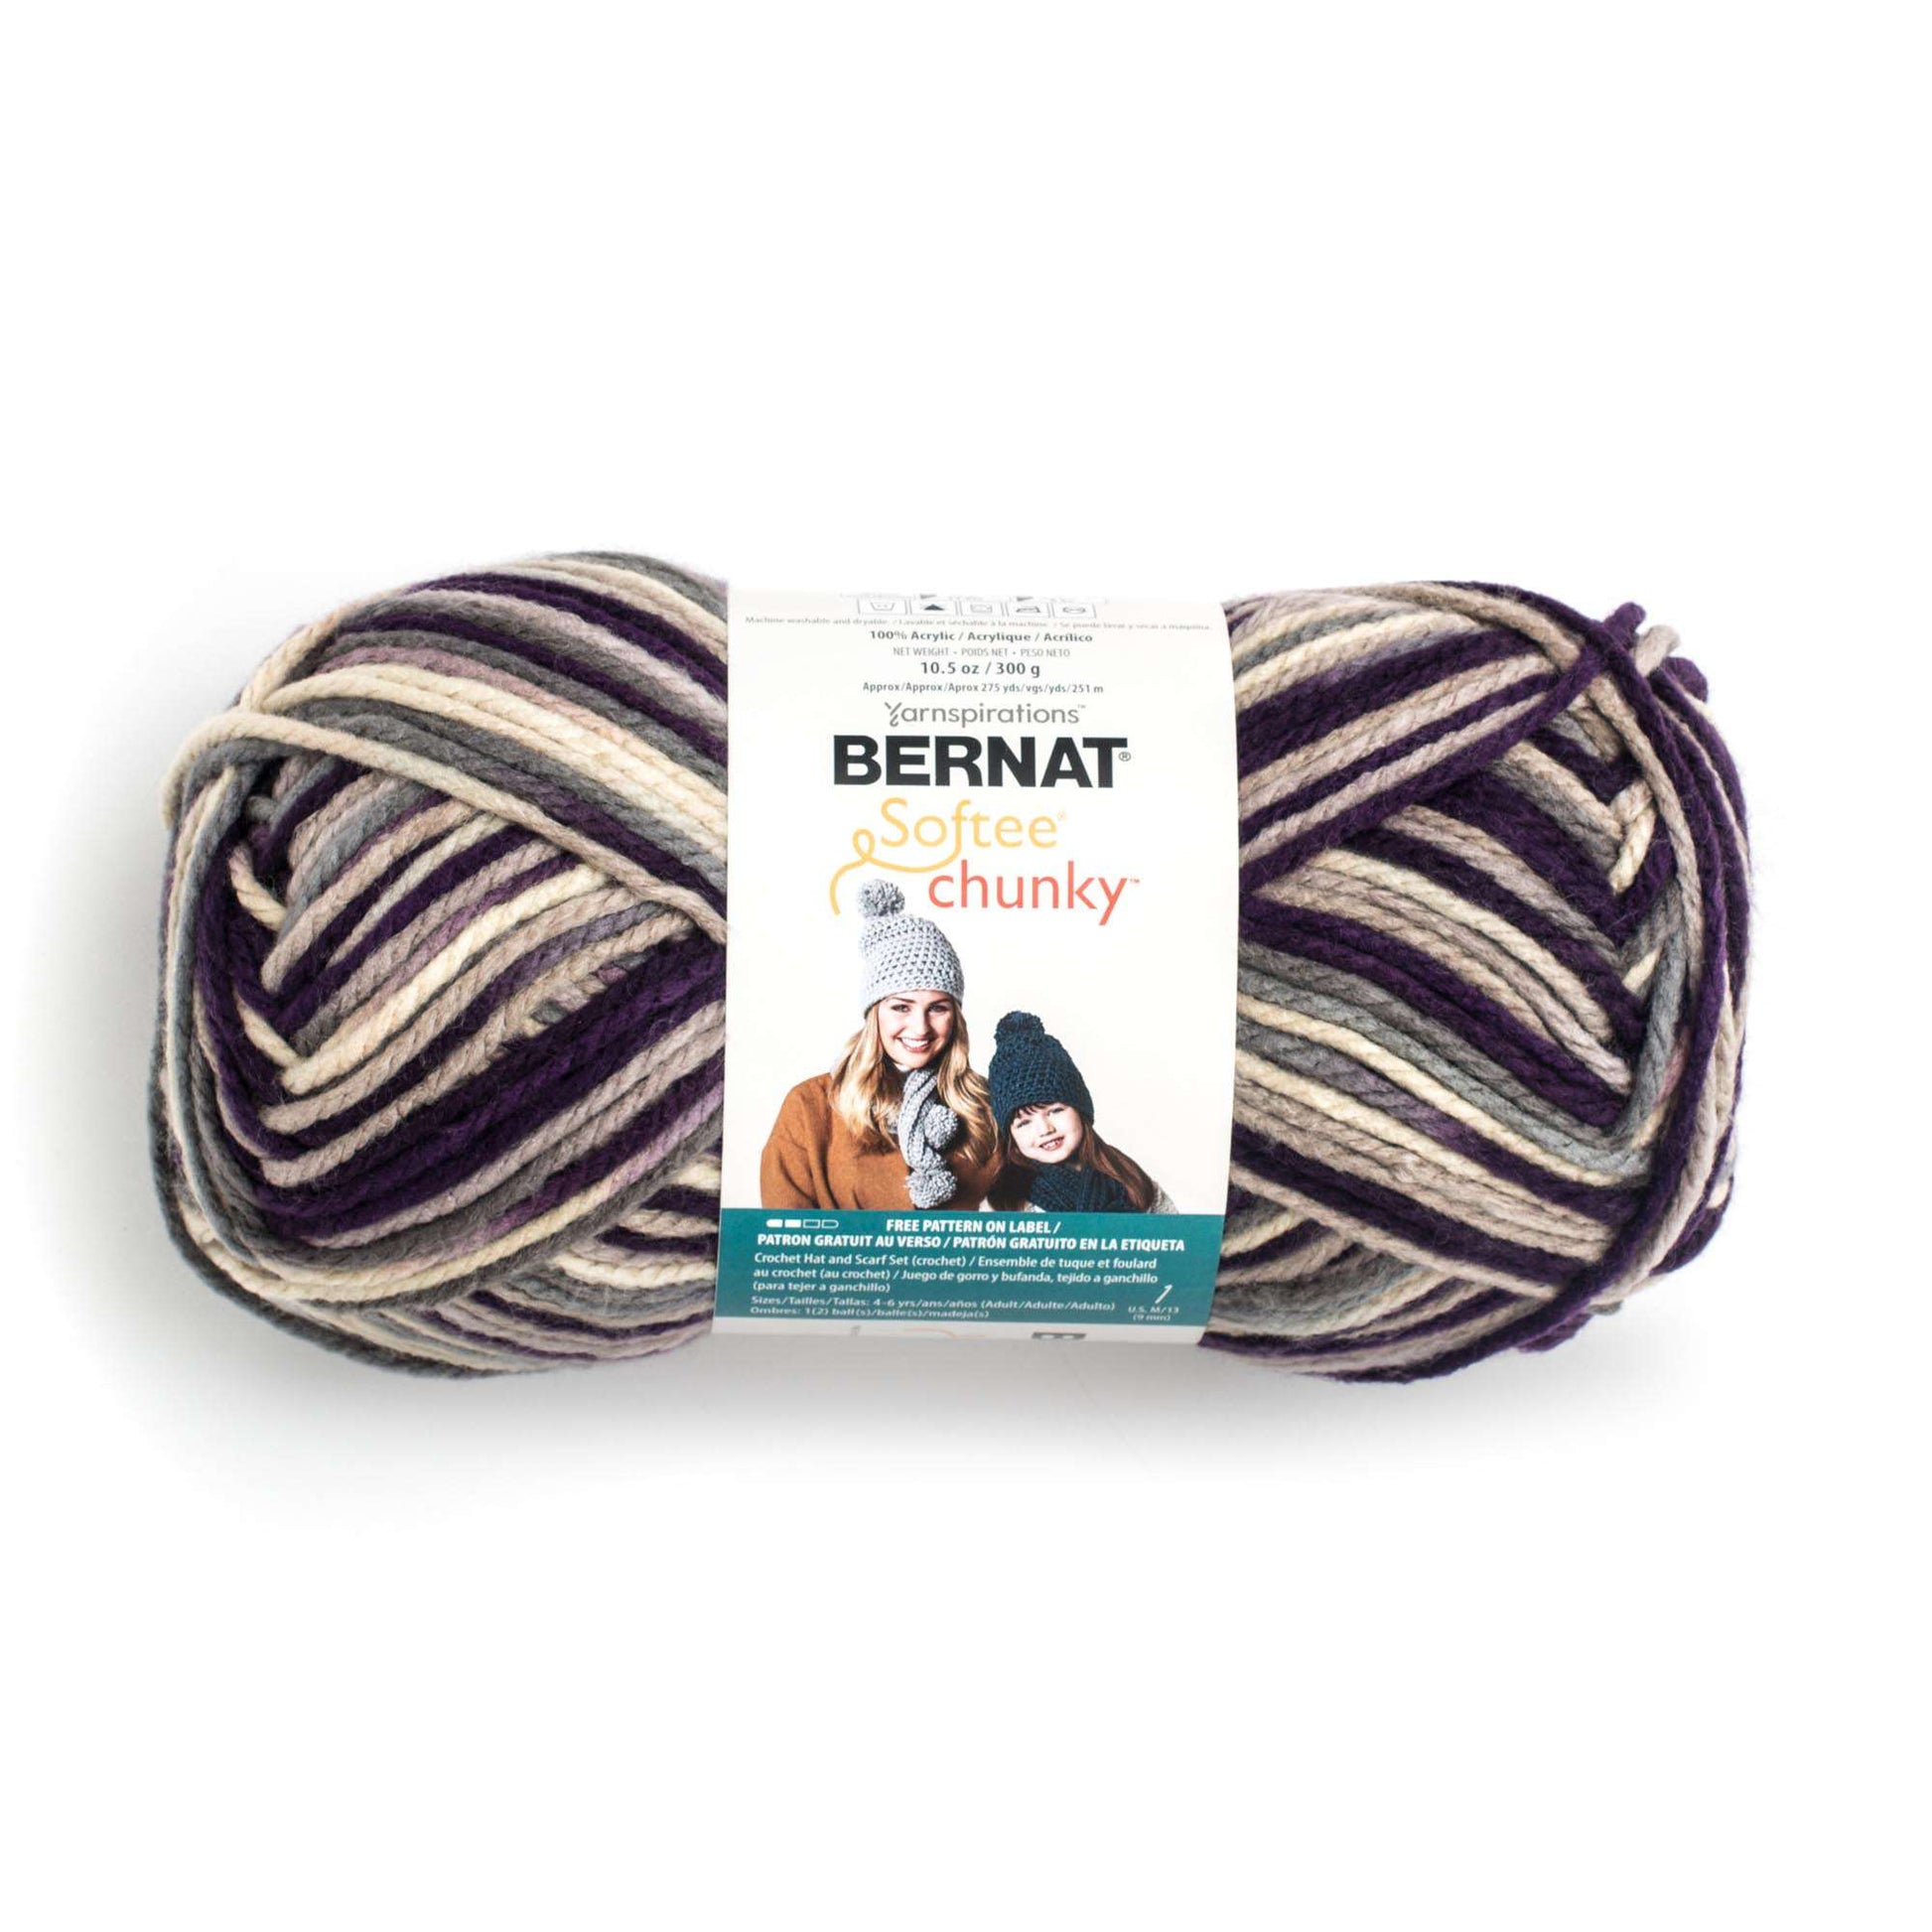 Bernat Softee Chunky Ombres Yarn (300g/10.5oz) Intrigue Ombre